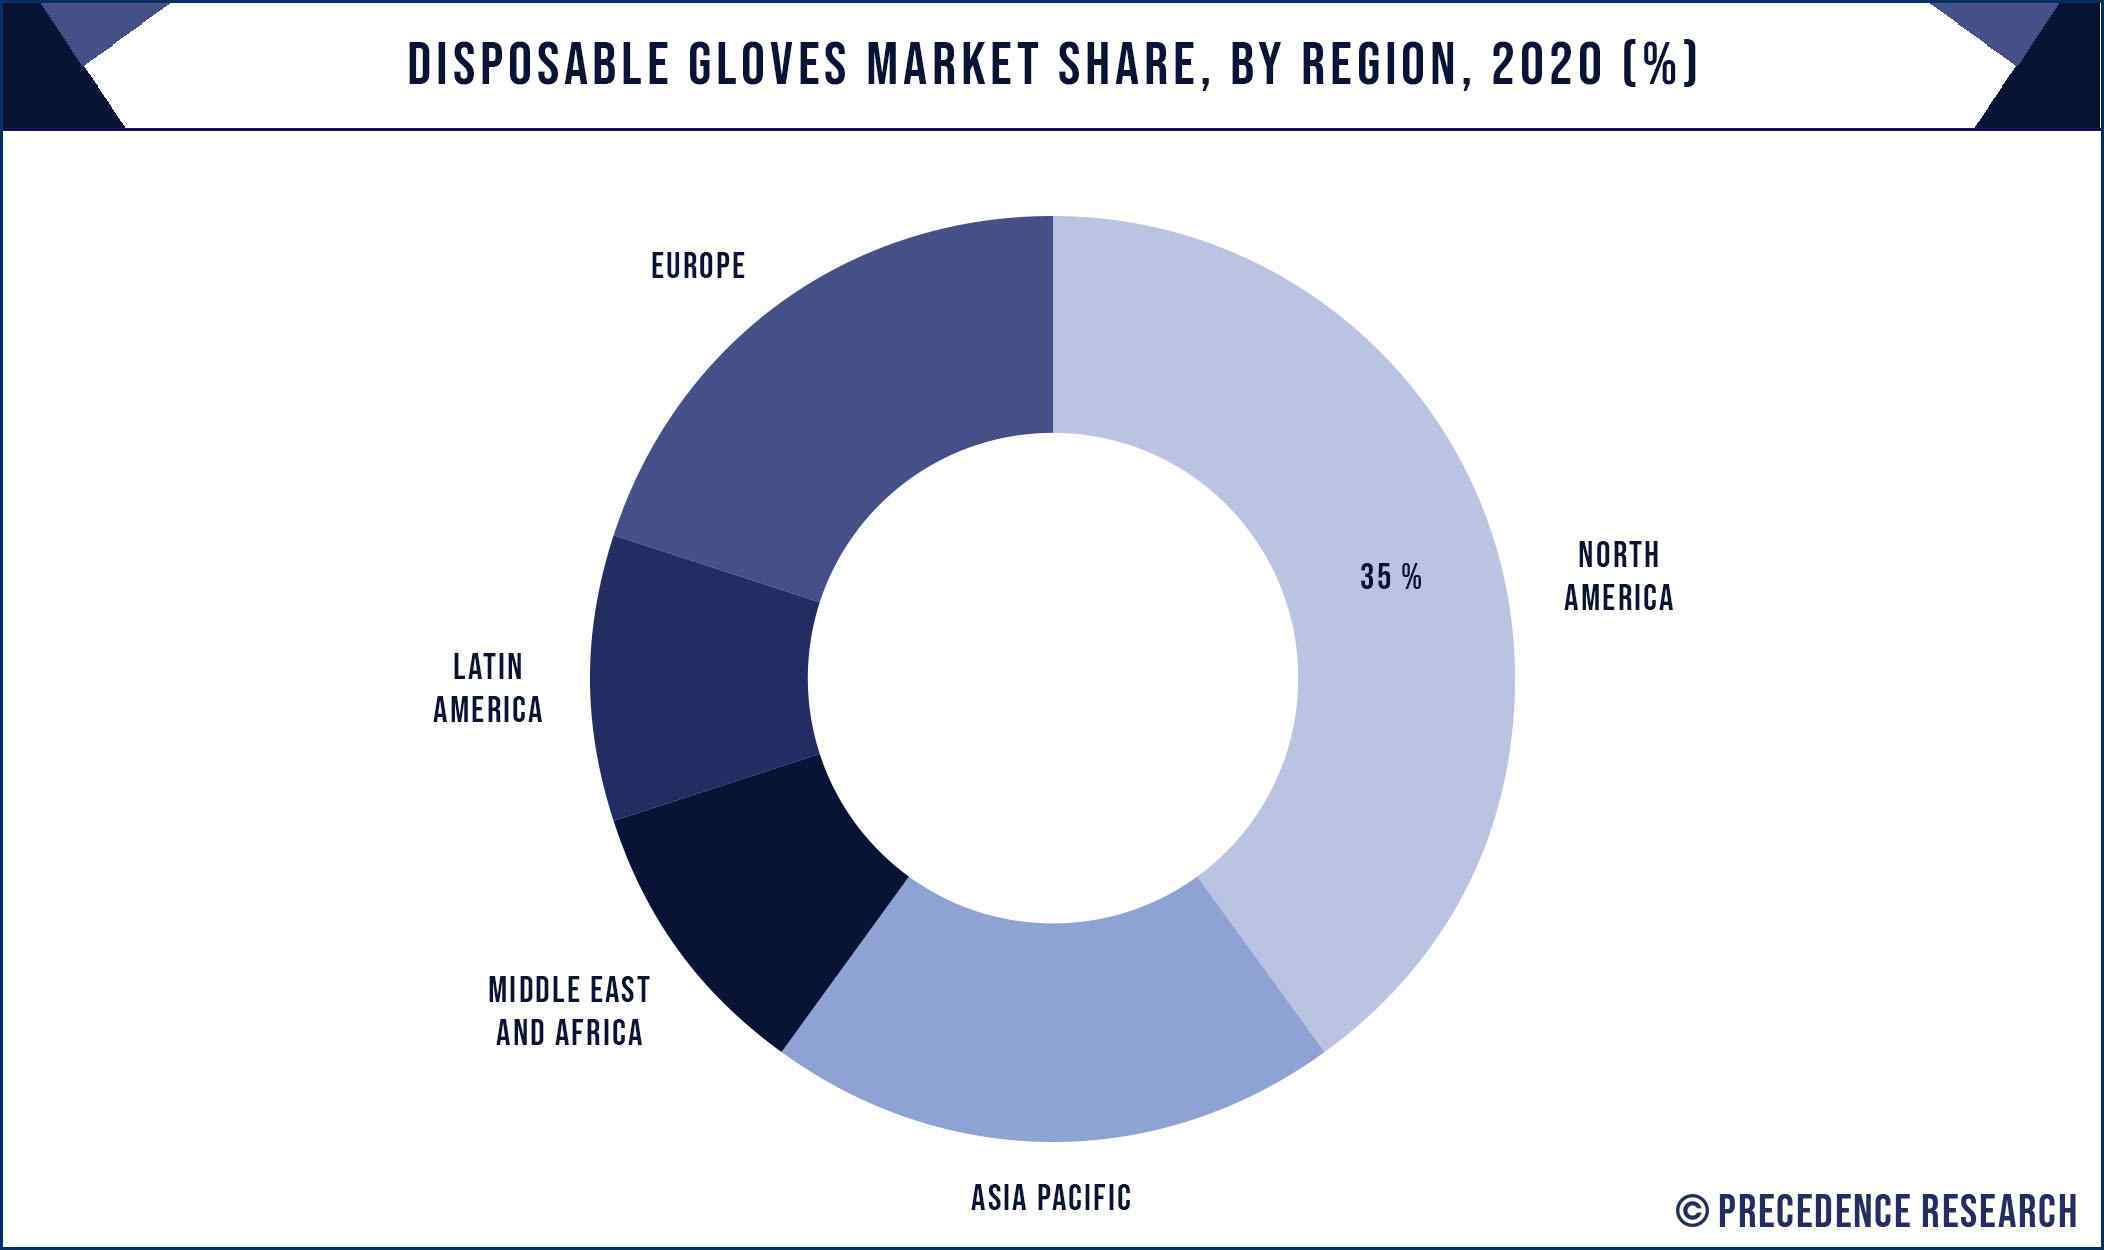 Disposable Gloves Market Share, By Region, 2020 (%)